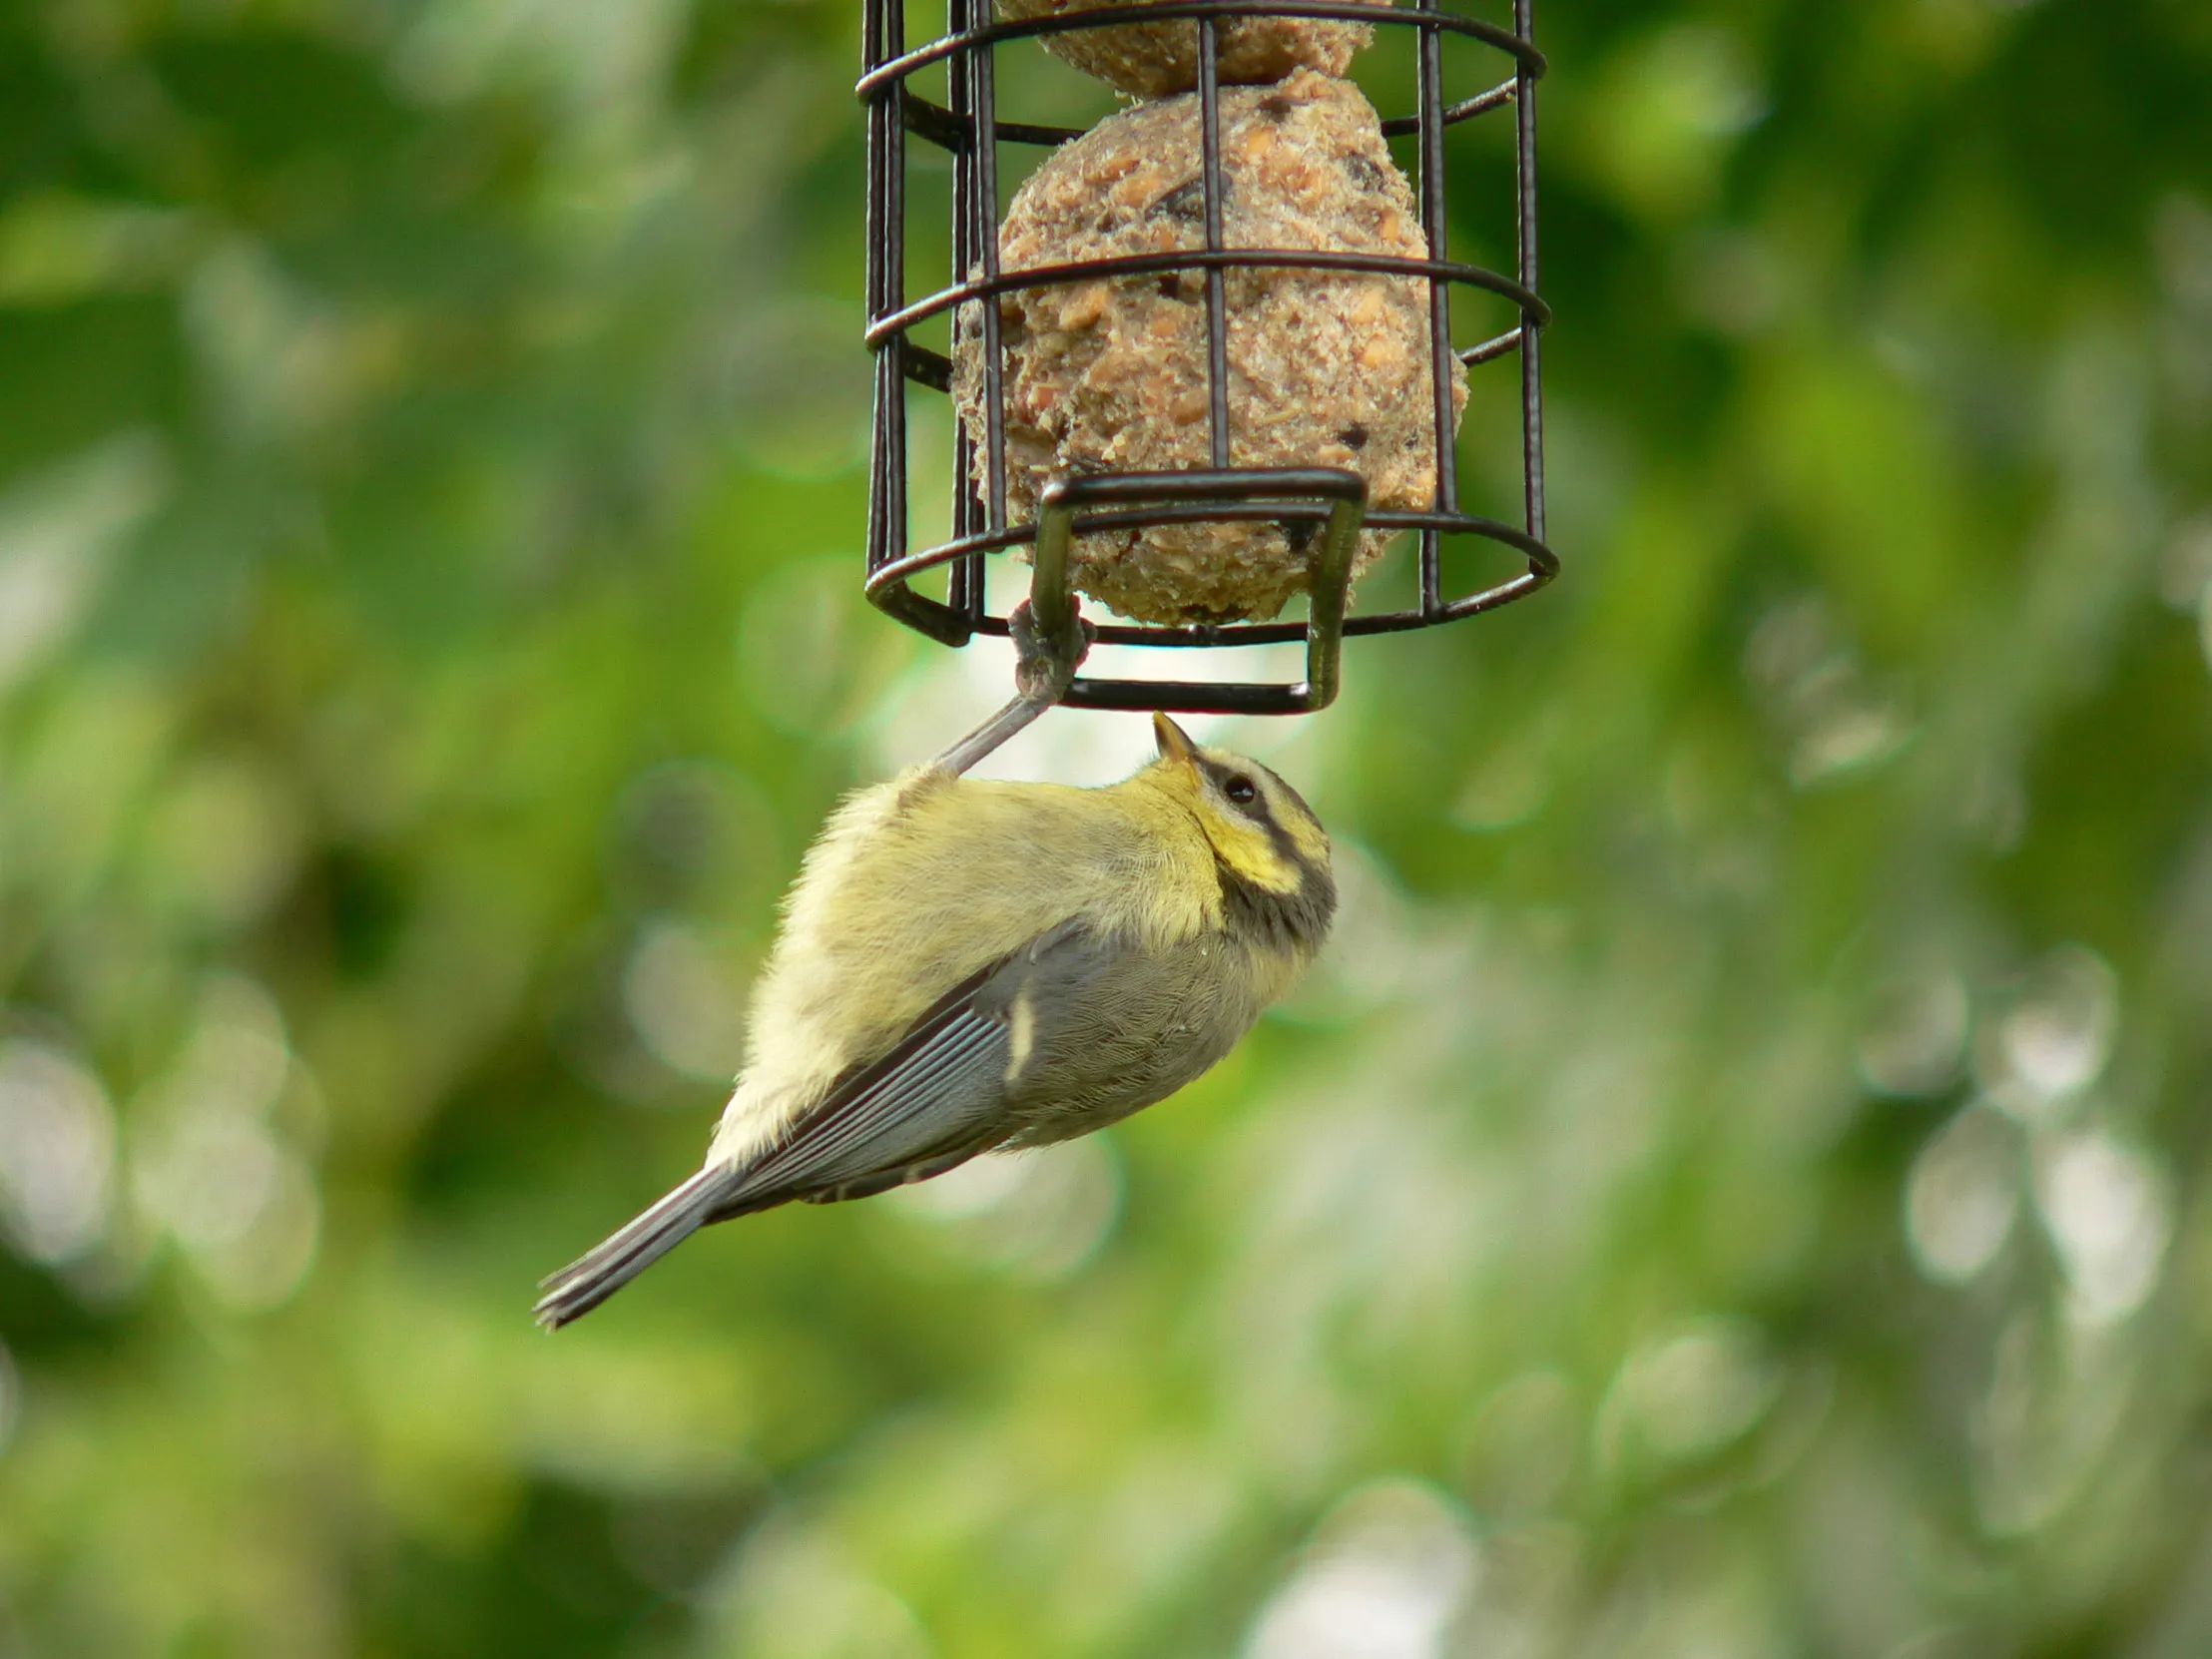 A lone Blue Tit hanging off the bottom of a domestic bird feeder.